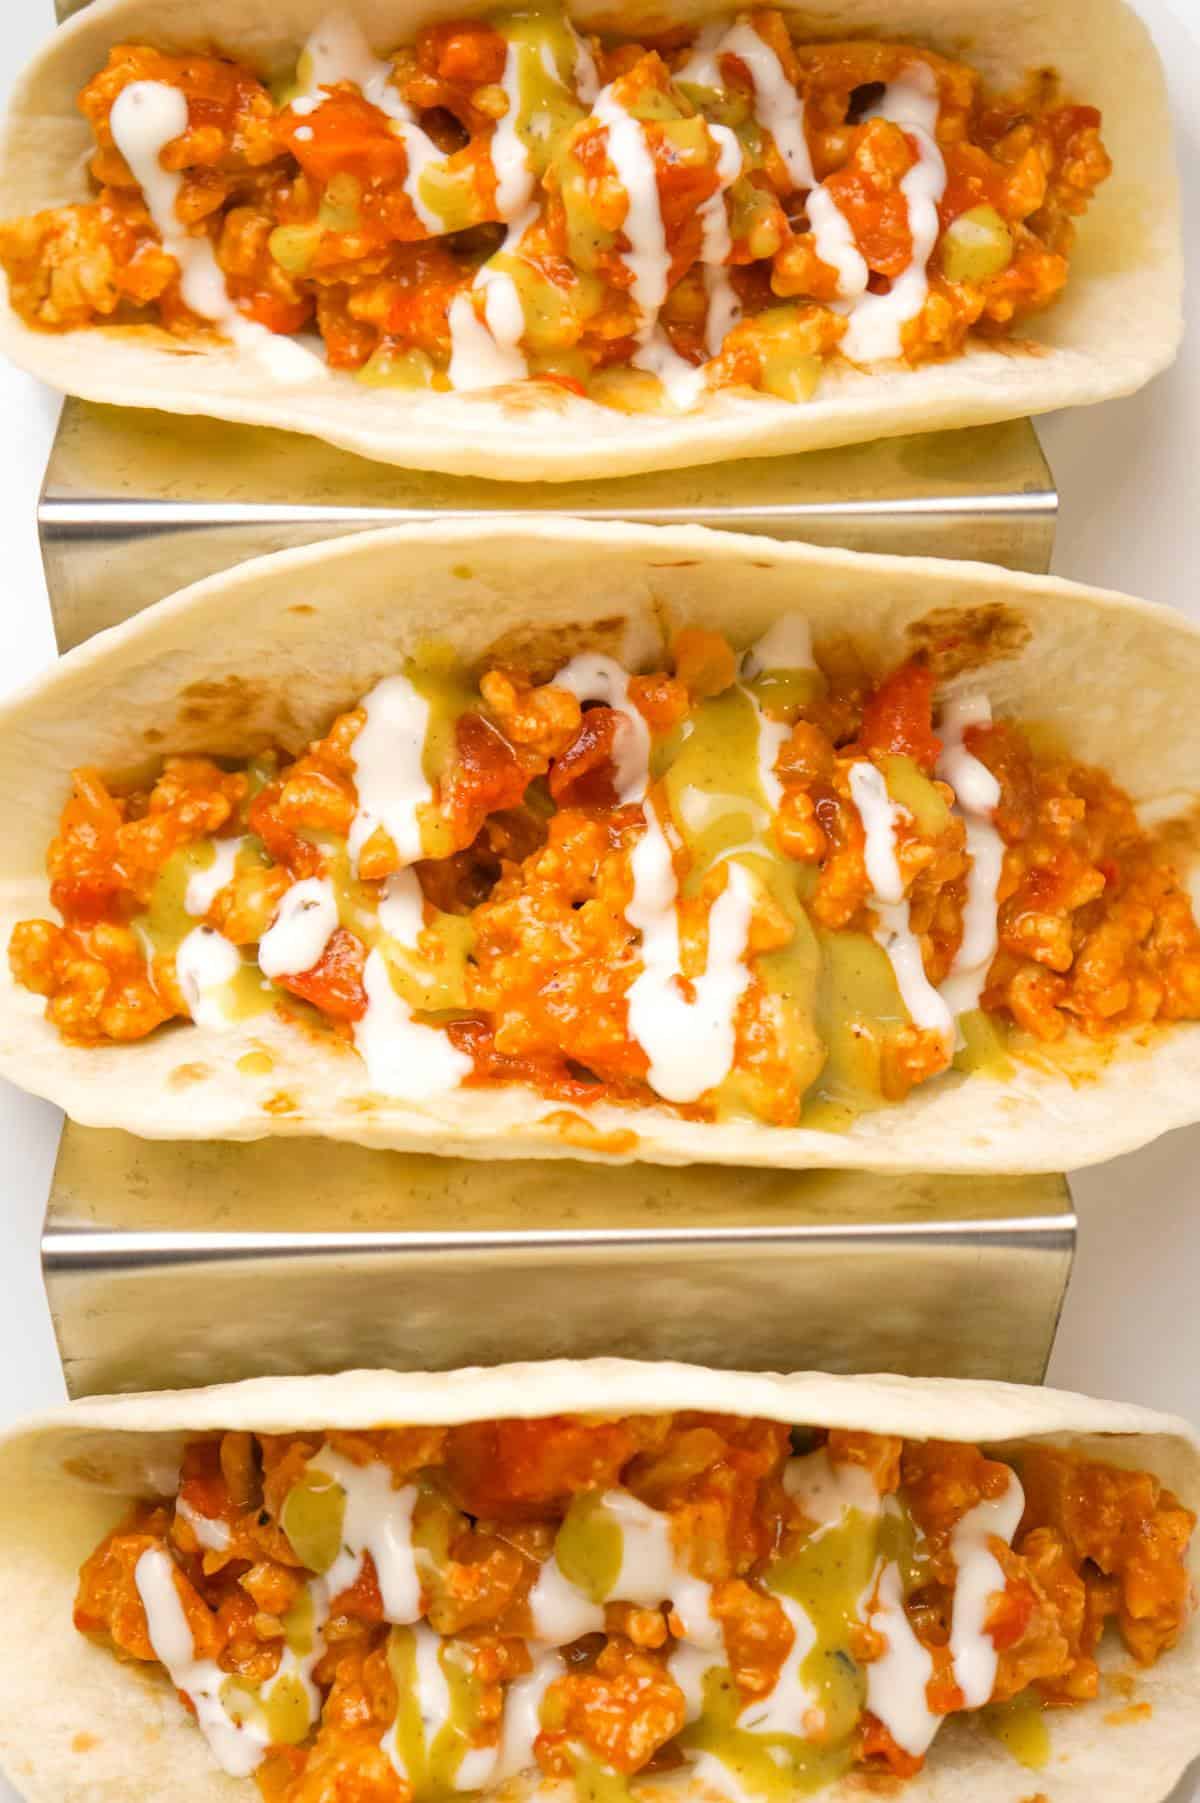 Ground Chicken Tacos are an easy weeknight dinner recipe made with lean ground chicken, chicken taco seasoning, Rotel diced tomatoes and green chilies and shredded cheese served in flour tortillas and drizzled with ranch and avocado dressing.